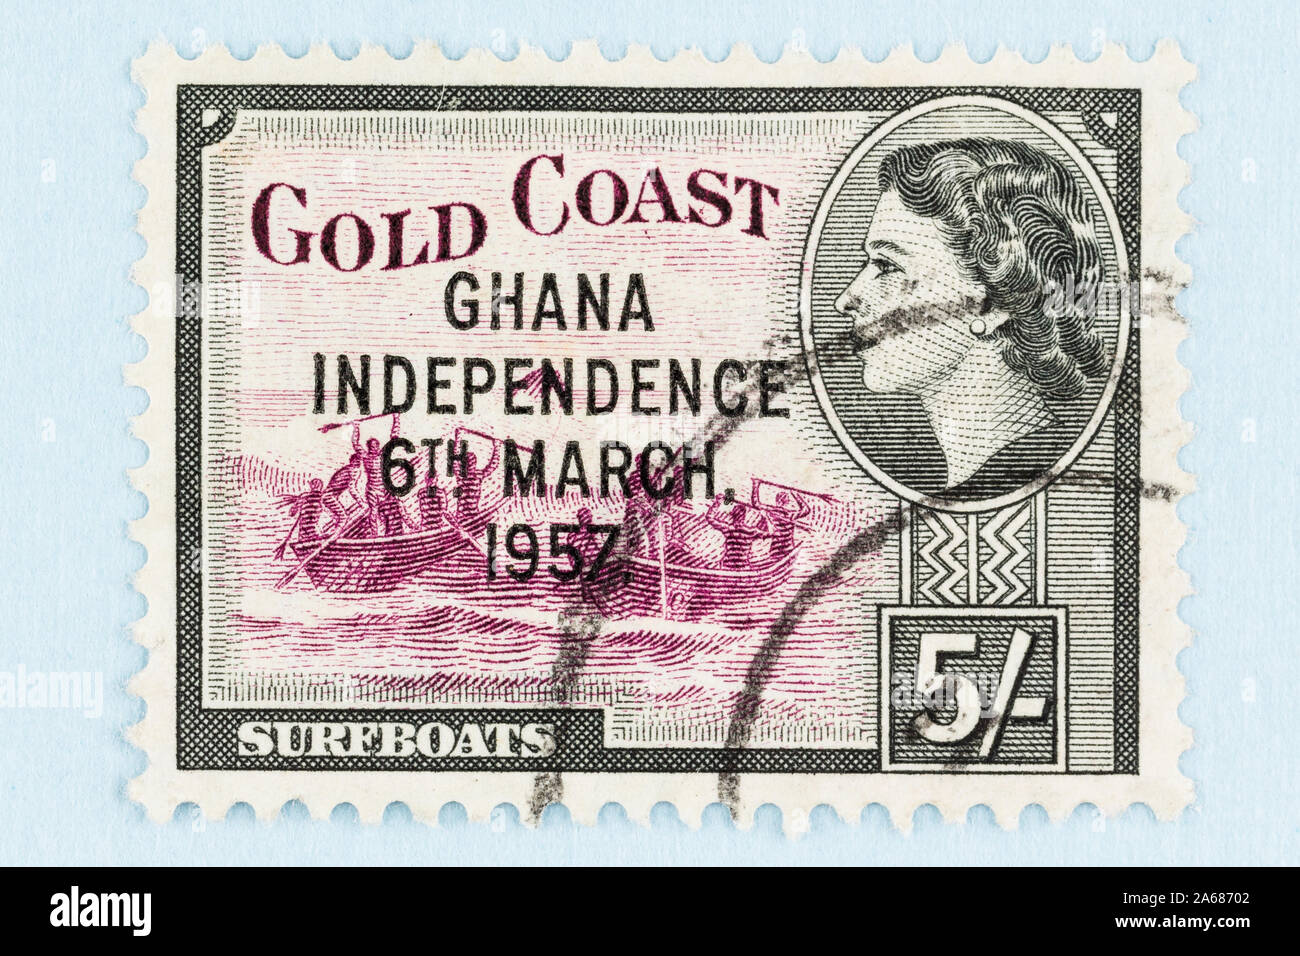 Close up of Gold Coast postage stamp with image of Queen Elizabeth and traditional  surfboats, overprinted with Ghana Independence, March 6, 1957. Stock Photo